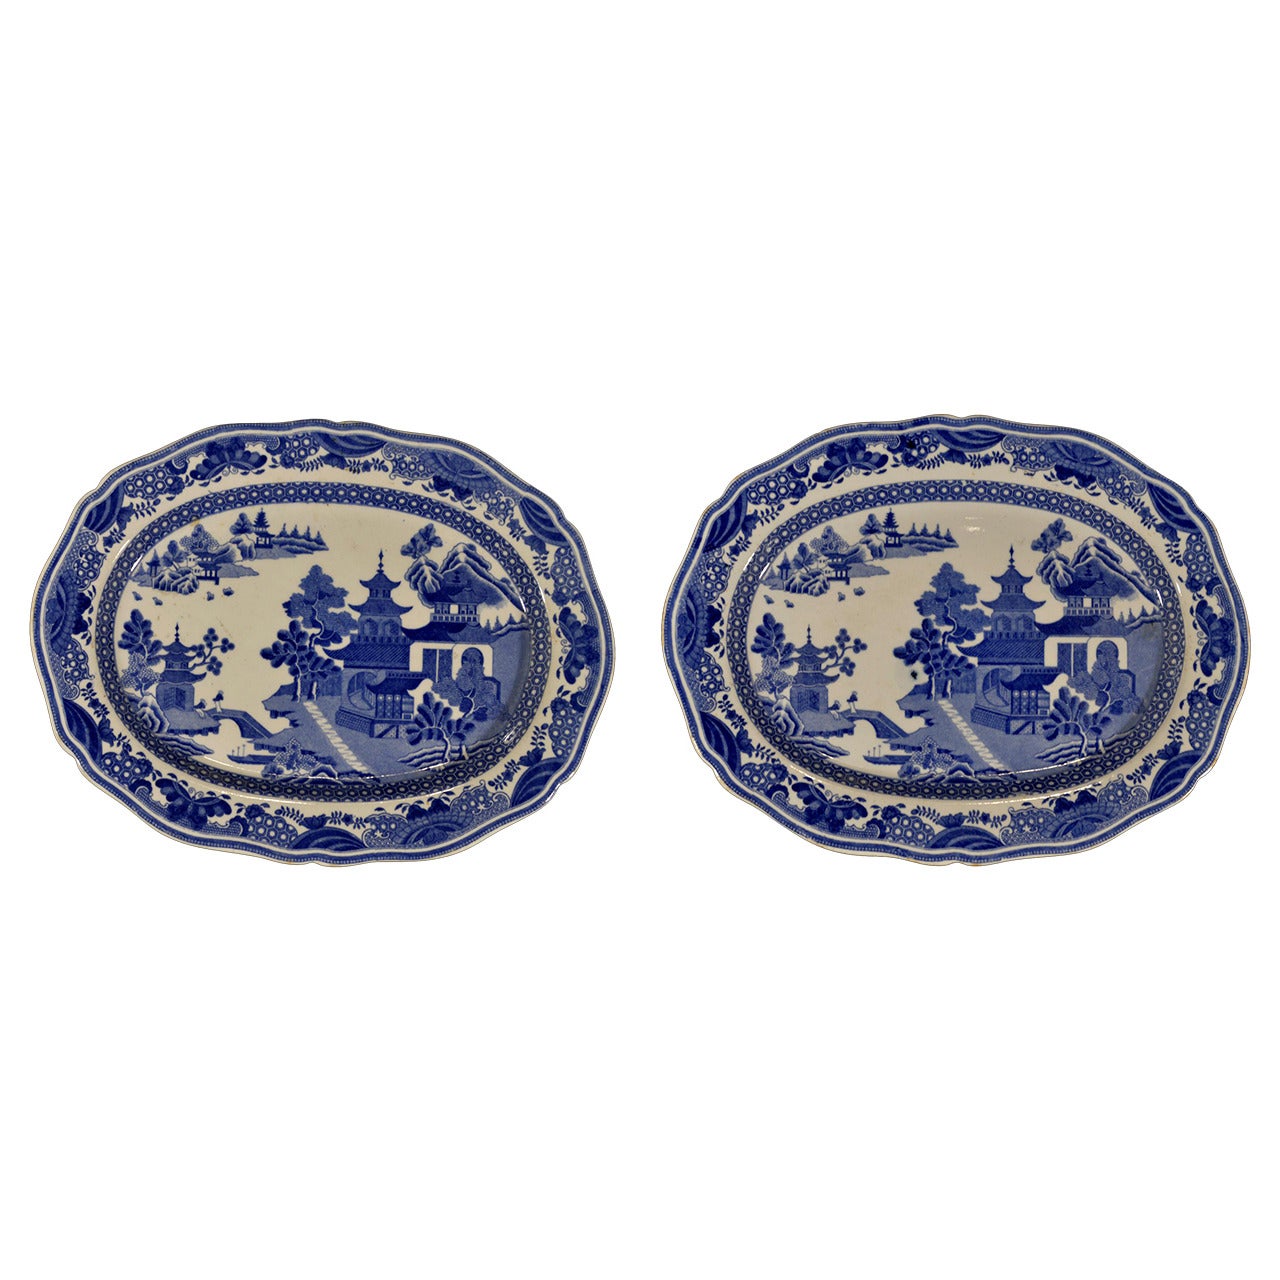 Staffordshire Chinoiserie Pearlware Underglaze Blue Dishes